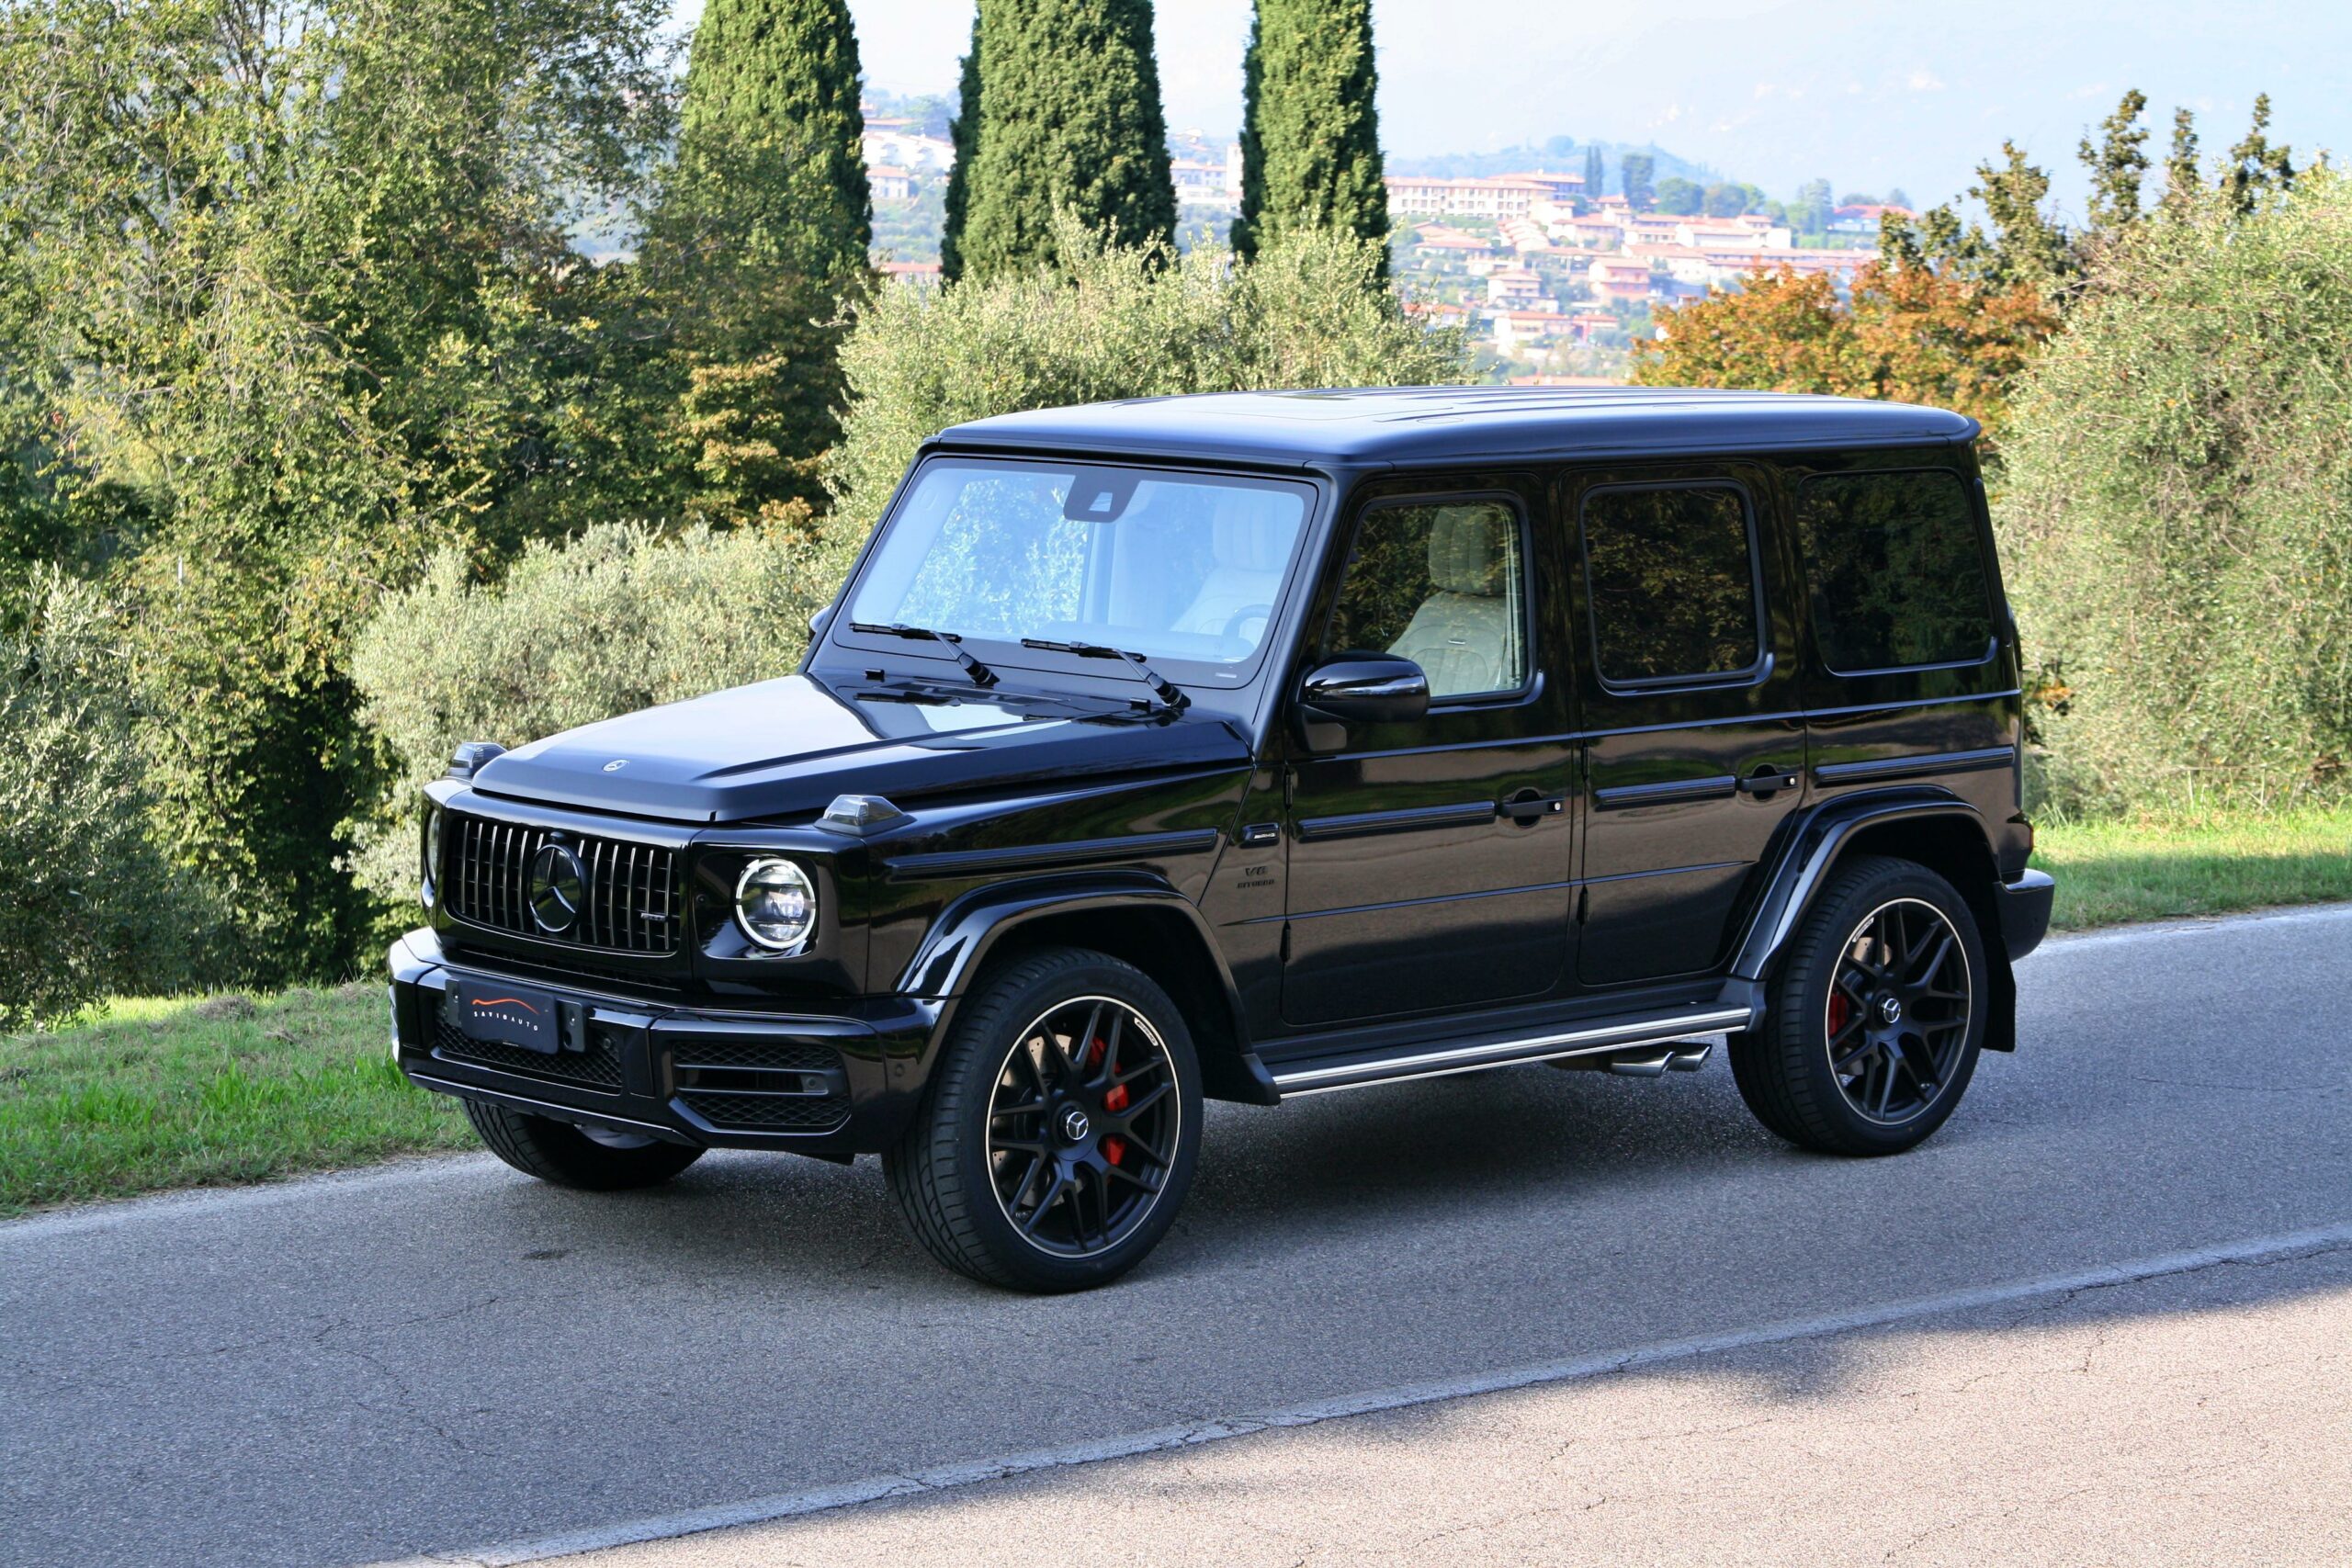 MERCEDES BENZ AMG G63 - Gallery img 01